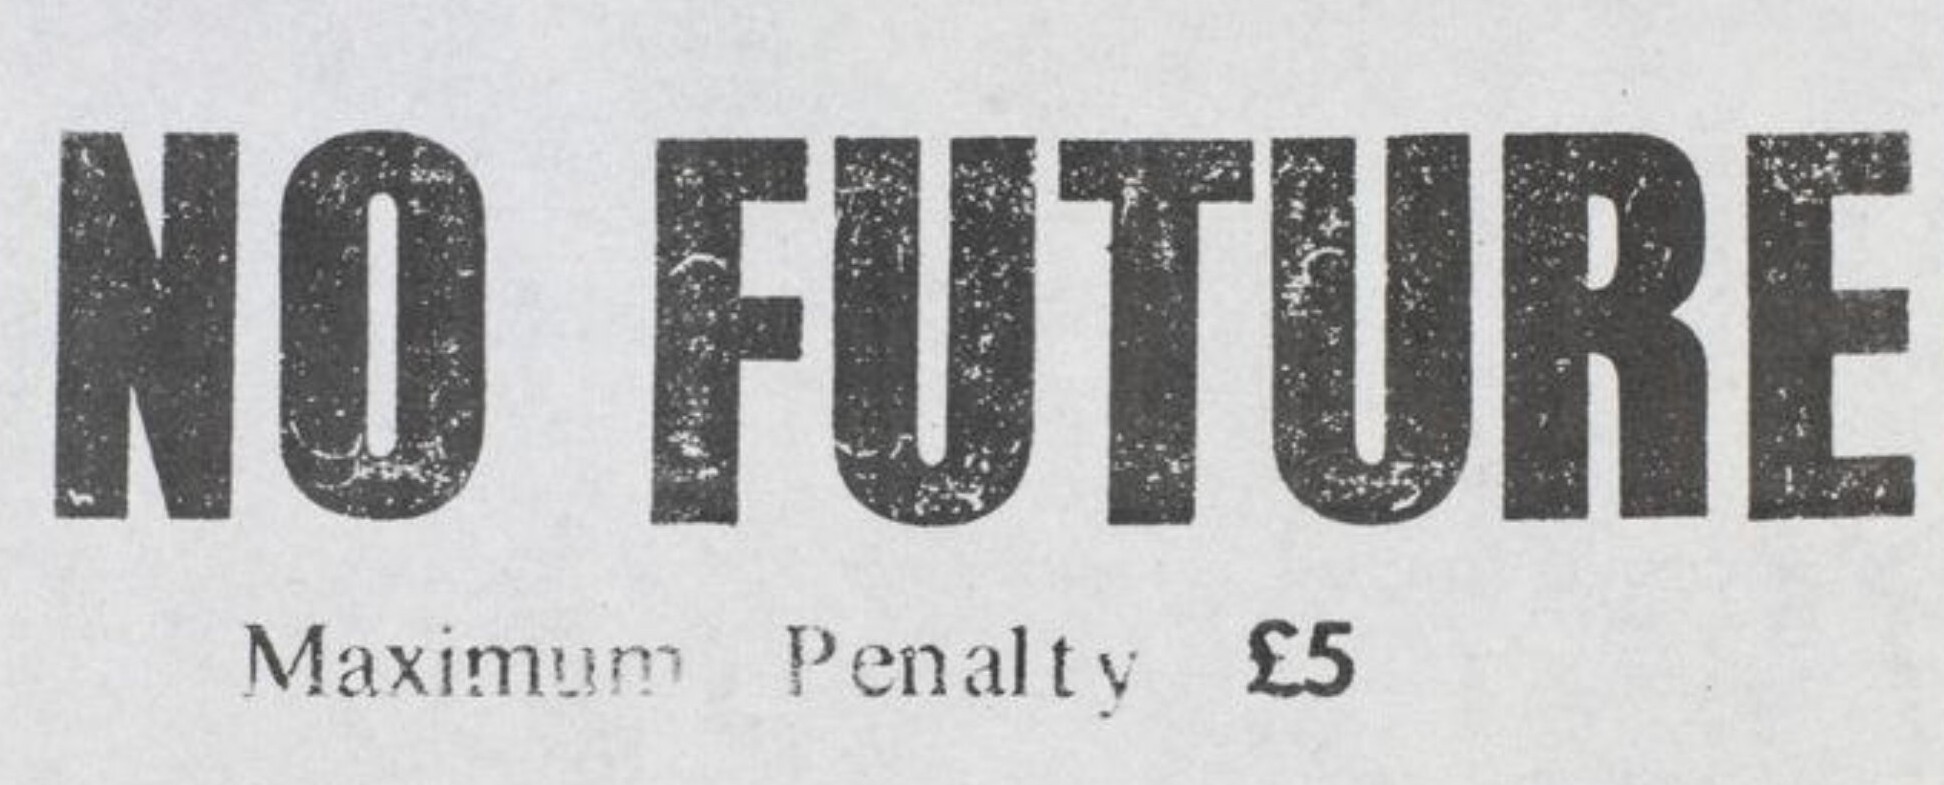 A sticker that says "No future, maximum penalty 5 pounds".
